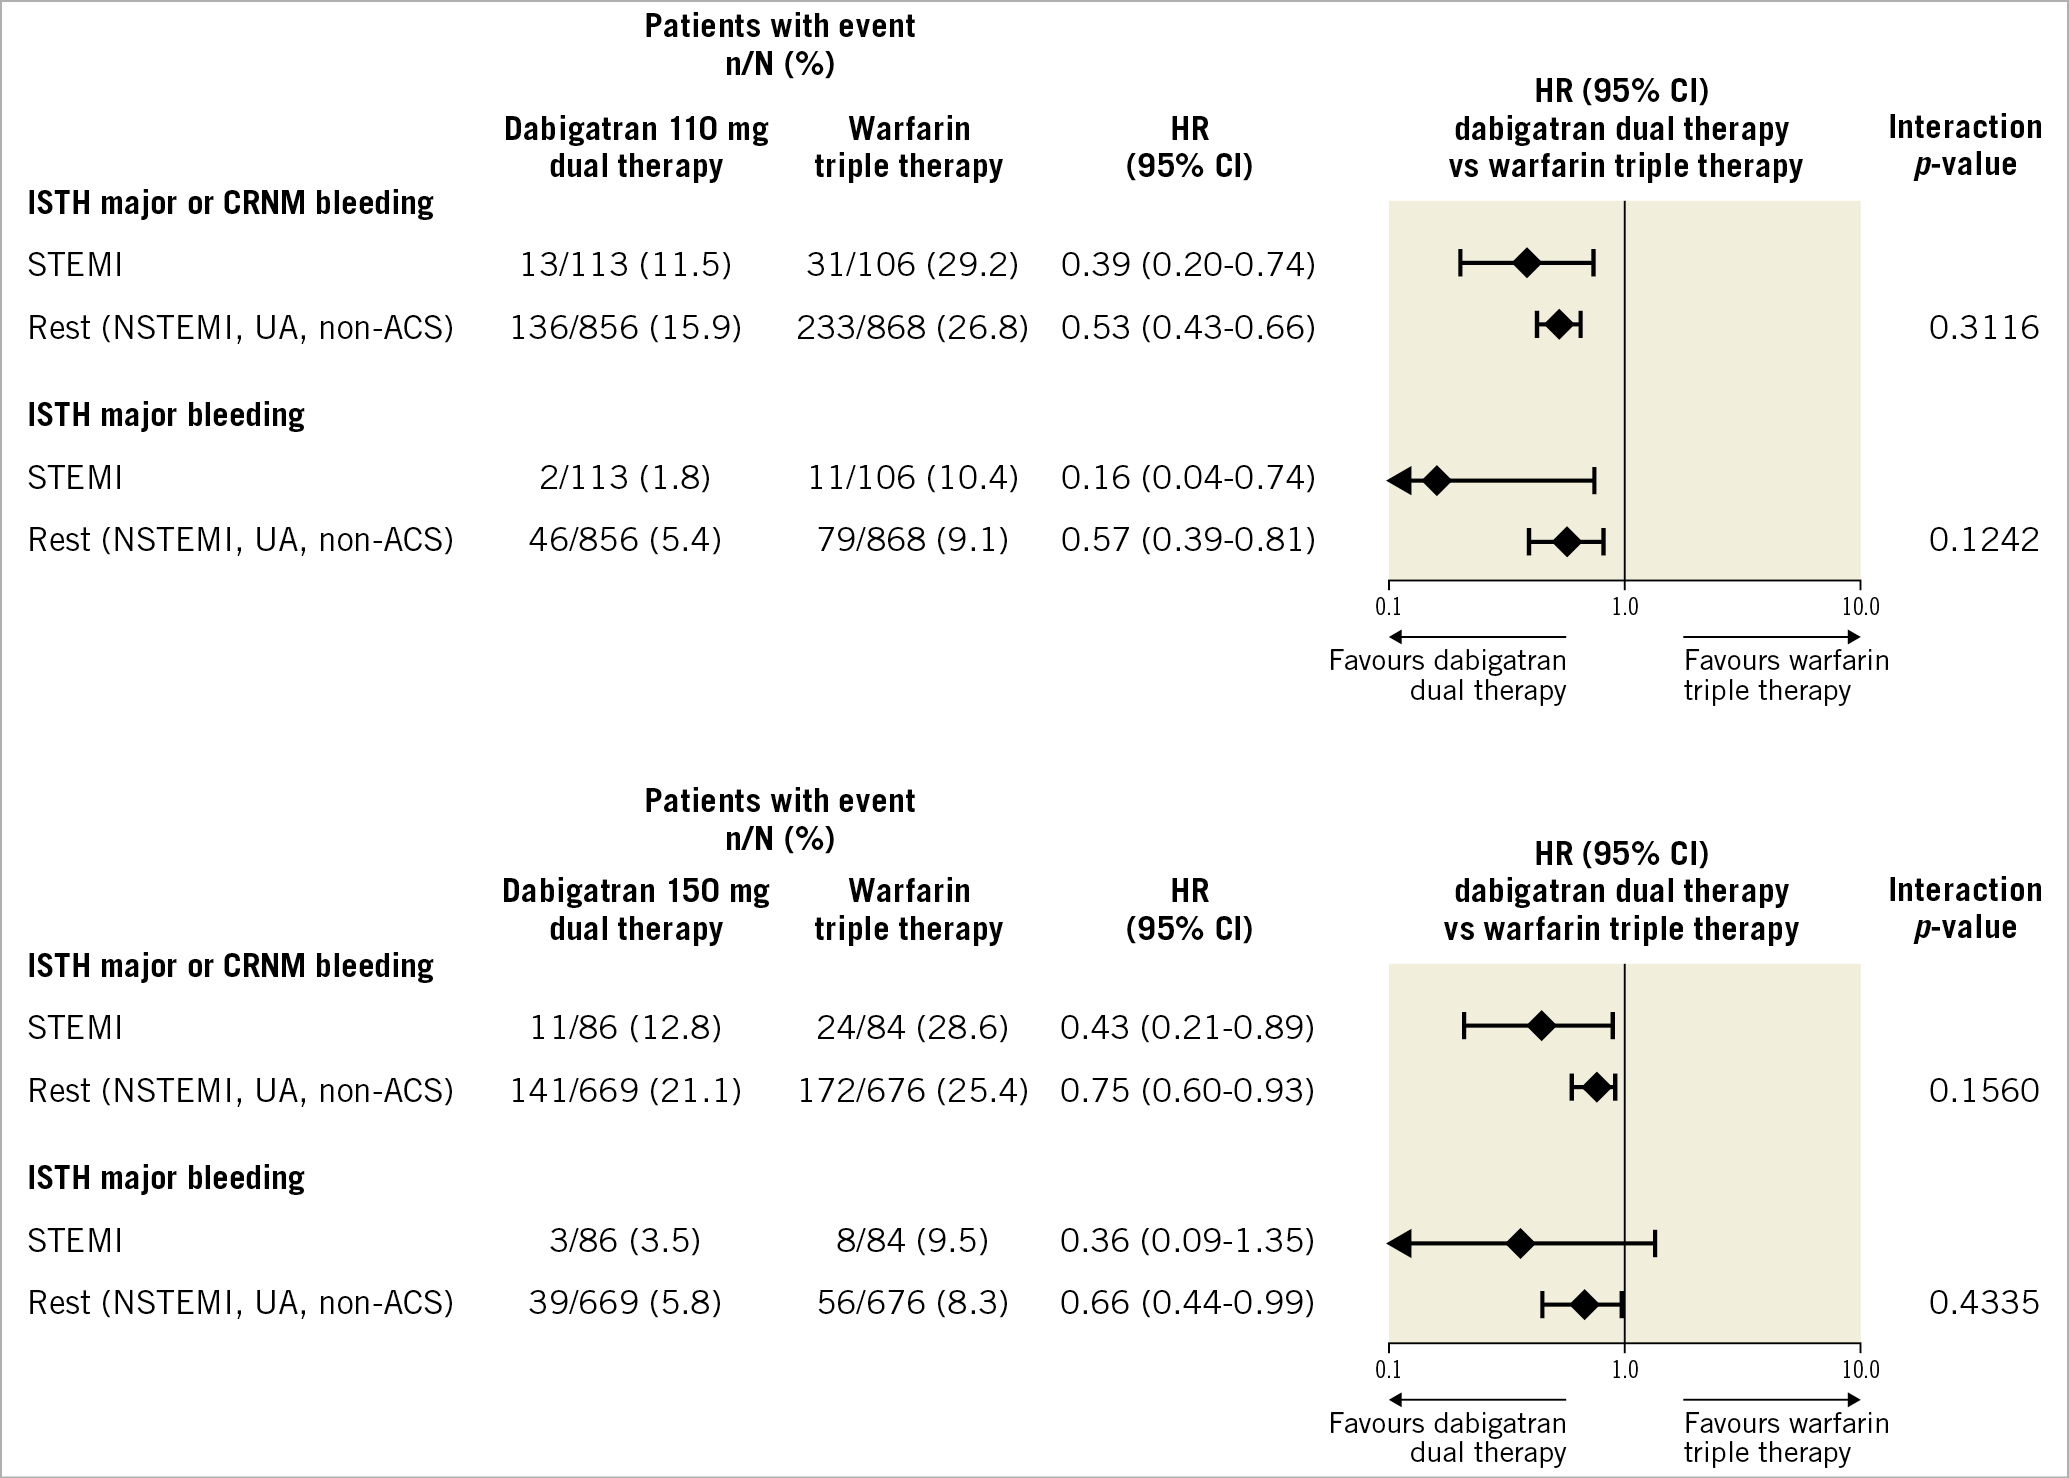 Figure 1. Bleeding endpoints in patients with STEMI versus others treated with dabigatran dual therapy versus warfarin triple therapy. HRs and Wald CIs from Cox proportional hazards model. For the comparison dabigatran 110 mg dual therapy versus warfarin triple therapy, the model is stratified by age, non-elderly versus elderly (<70 or ≥70 years in Japan and <80 or ≥80 years elsewhere). For the comparison dabigatran 150 mg dual therapy versus warfarin triple therapy, an unstratified model is applied and elderly patients outside the USA were excluded. Exploratory interaction p-values for the interaction between treatment and subgroup. ACS: acute coronary syndrome; CI: confidence interval; CRNM: clinically relevant non-major; HR: hazard ratio; ISTH: International Society on Thrombosis and Haemostasis; NSTEMI: non-ST-segment elevation myocardial infarction; STEMI: ST-elevation myocardial infarction; UA: unstable angina